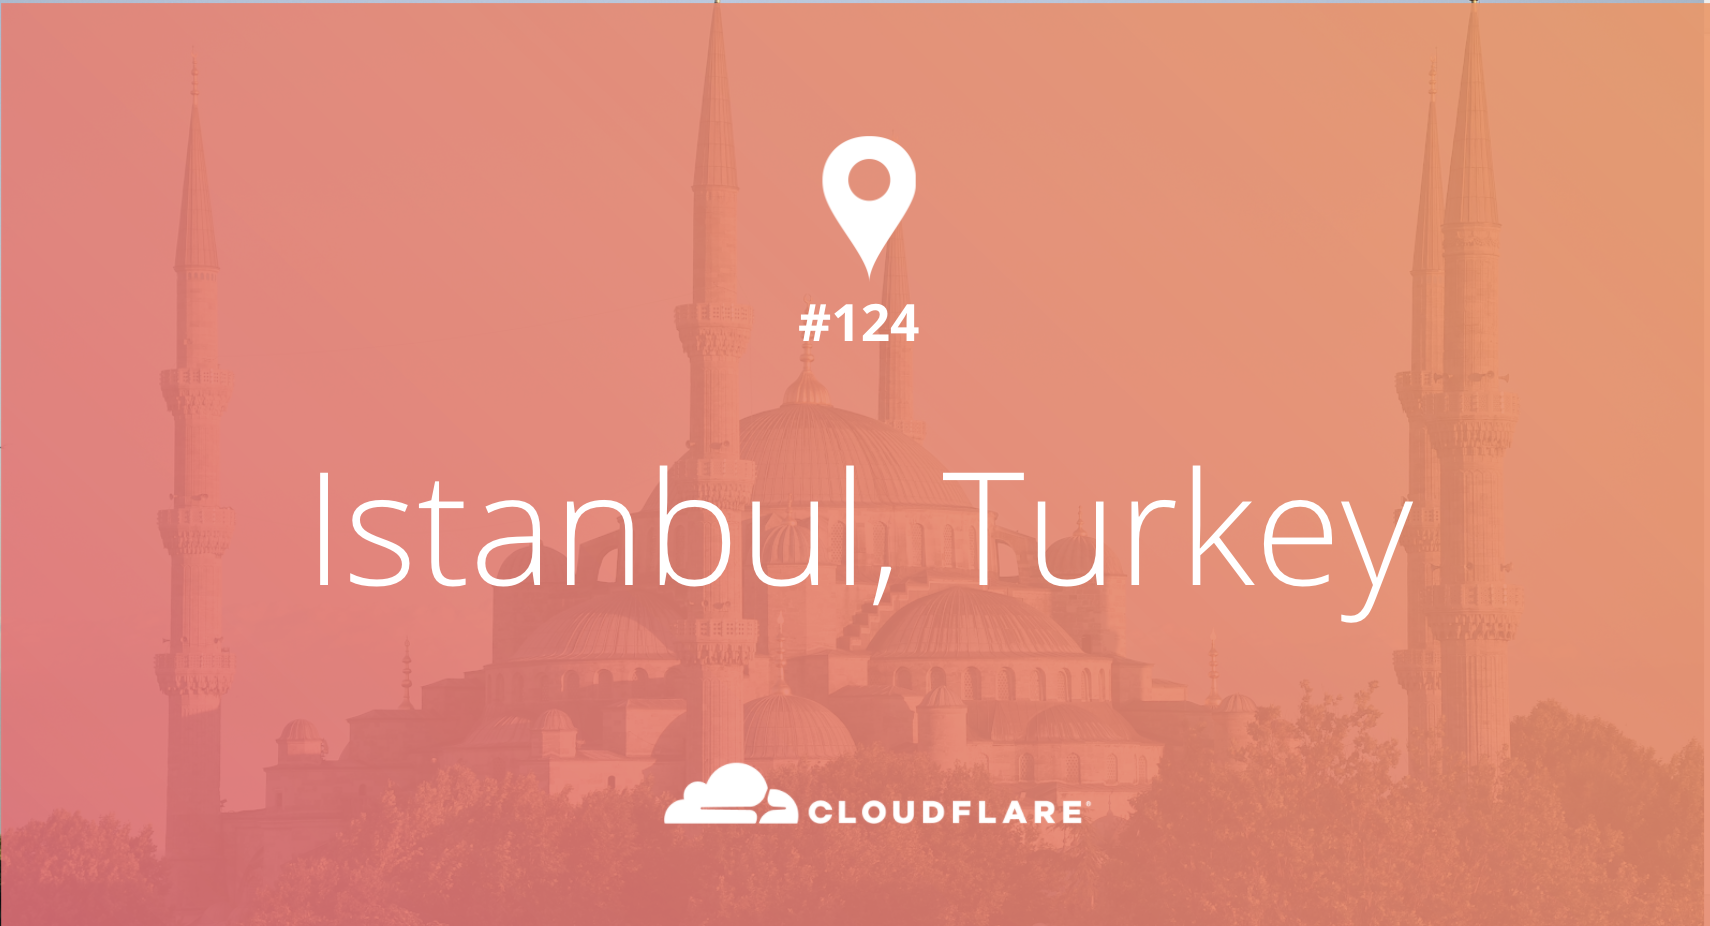 Istanbul (not Constantinople): Cloudflare’s 124th Data Center